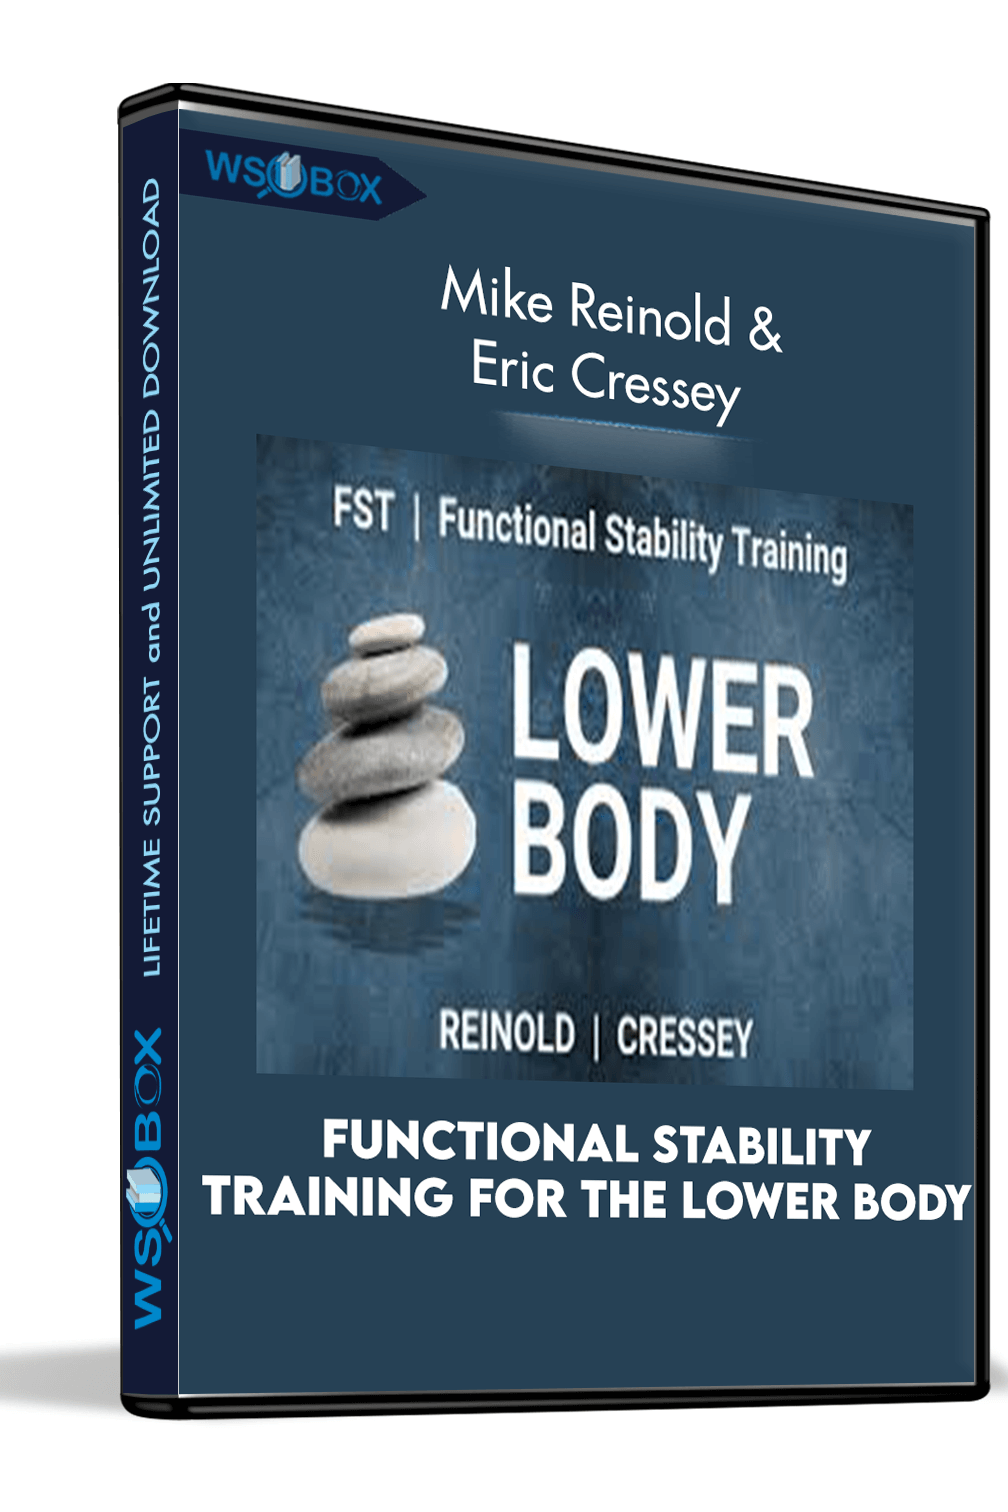 functional-stability-training-for-the-lower-body-mike-reinold-eric-cressey